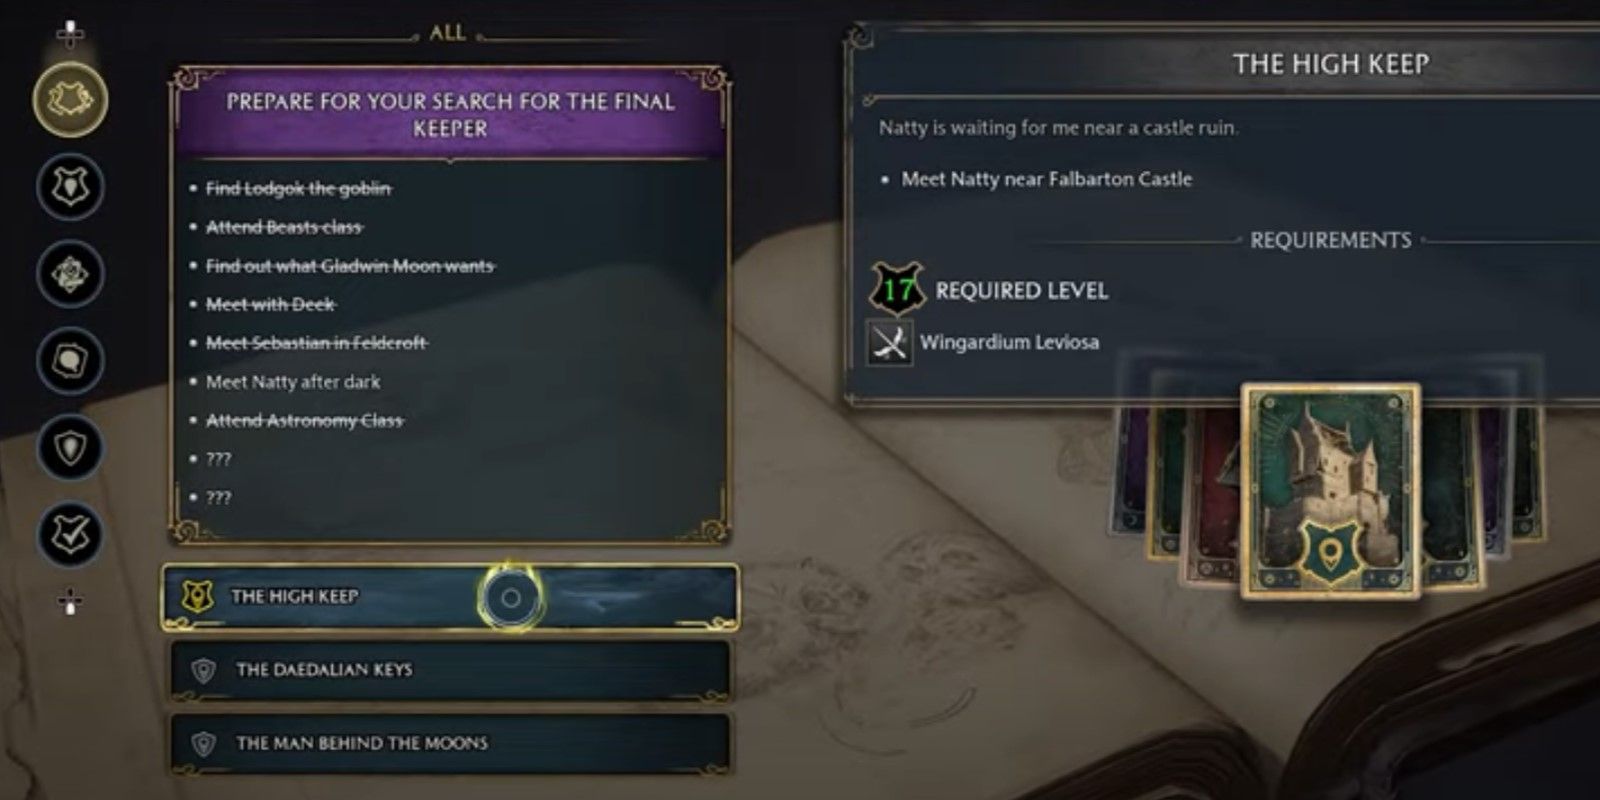 The Hogwarts Legacy character is showing the High Keep quest criteria.